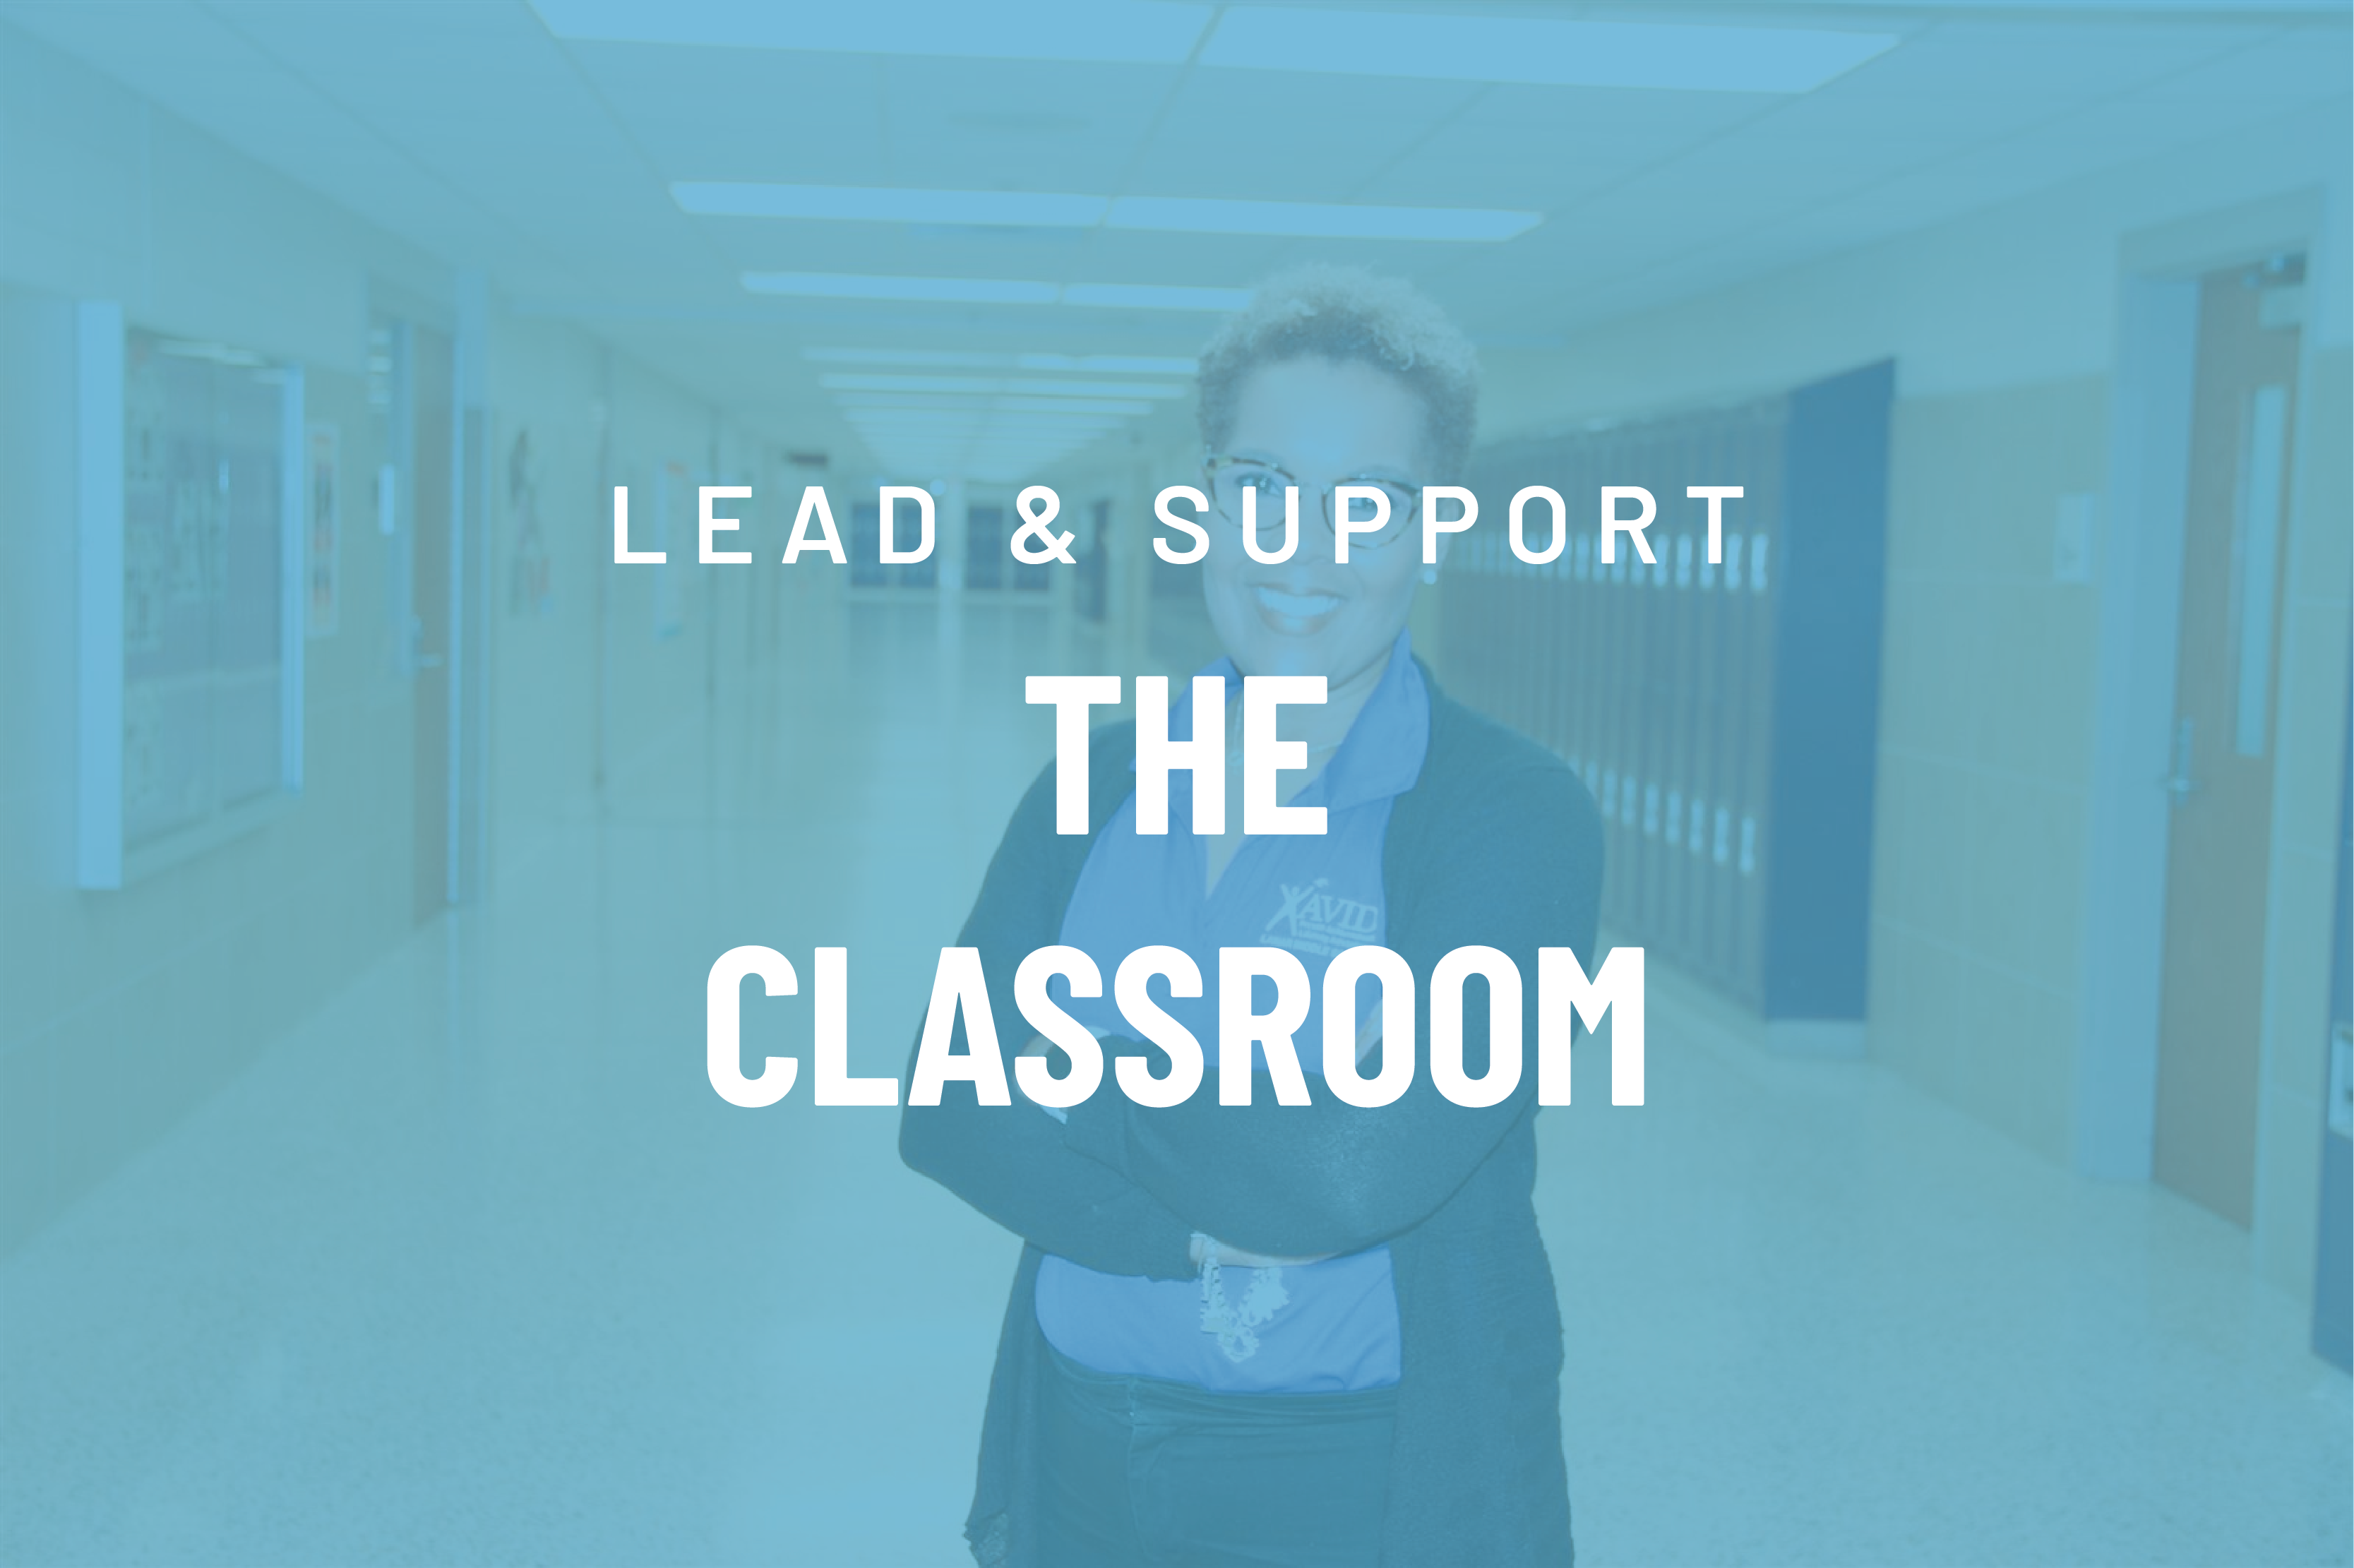 Lead & Support - The Classroom